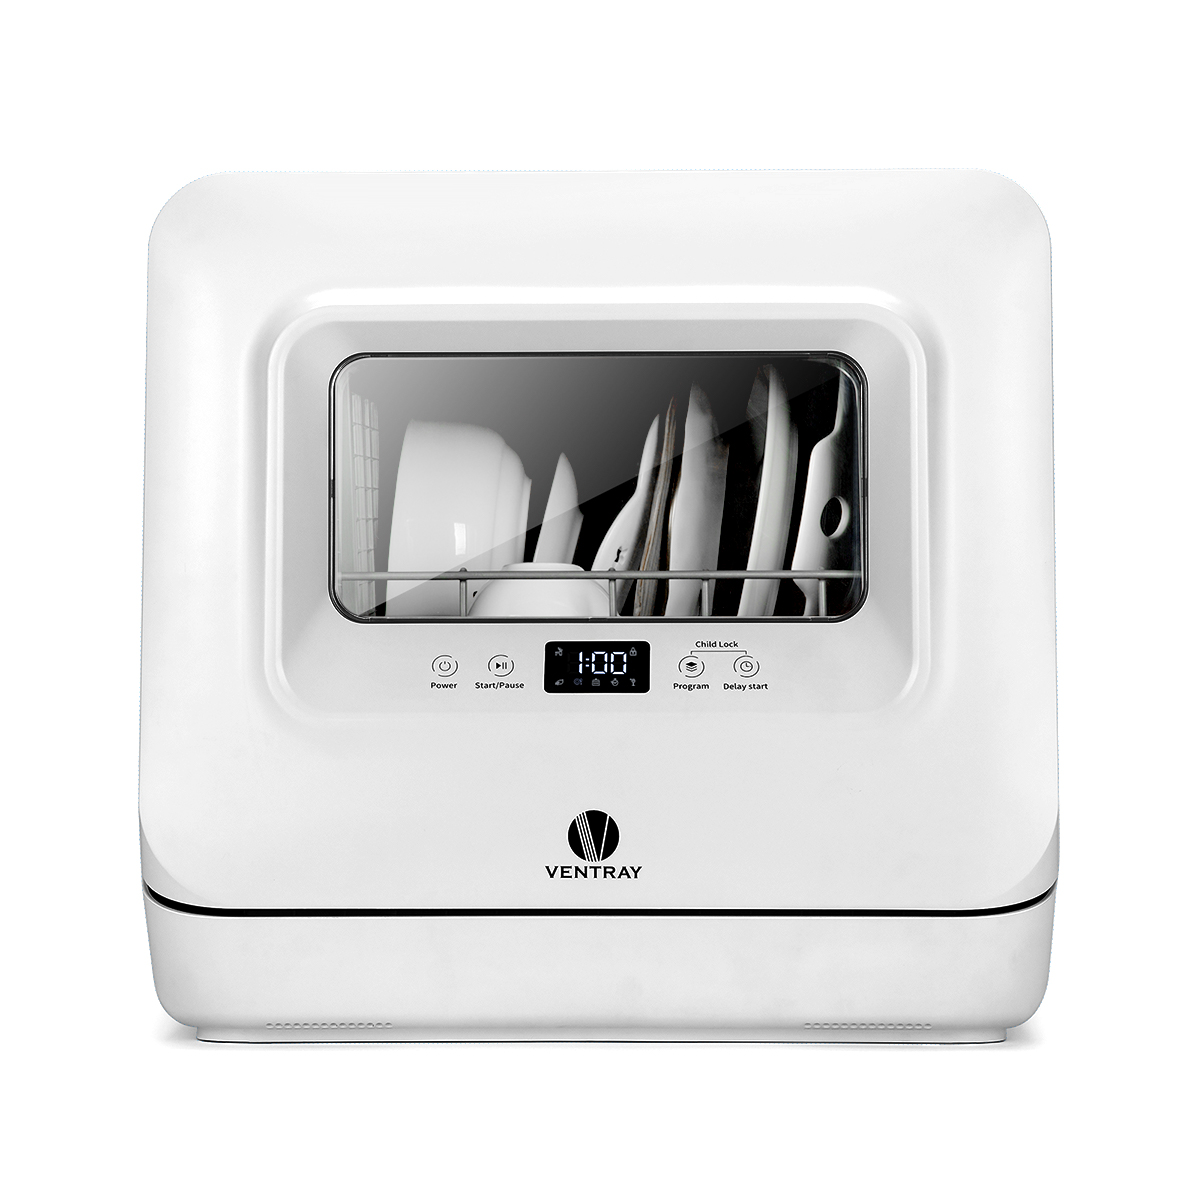 VENTRAY DW50  Portable Countertop Dishwashers with 5 Washing Programs